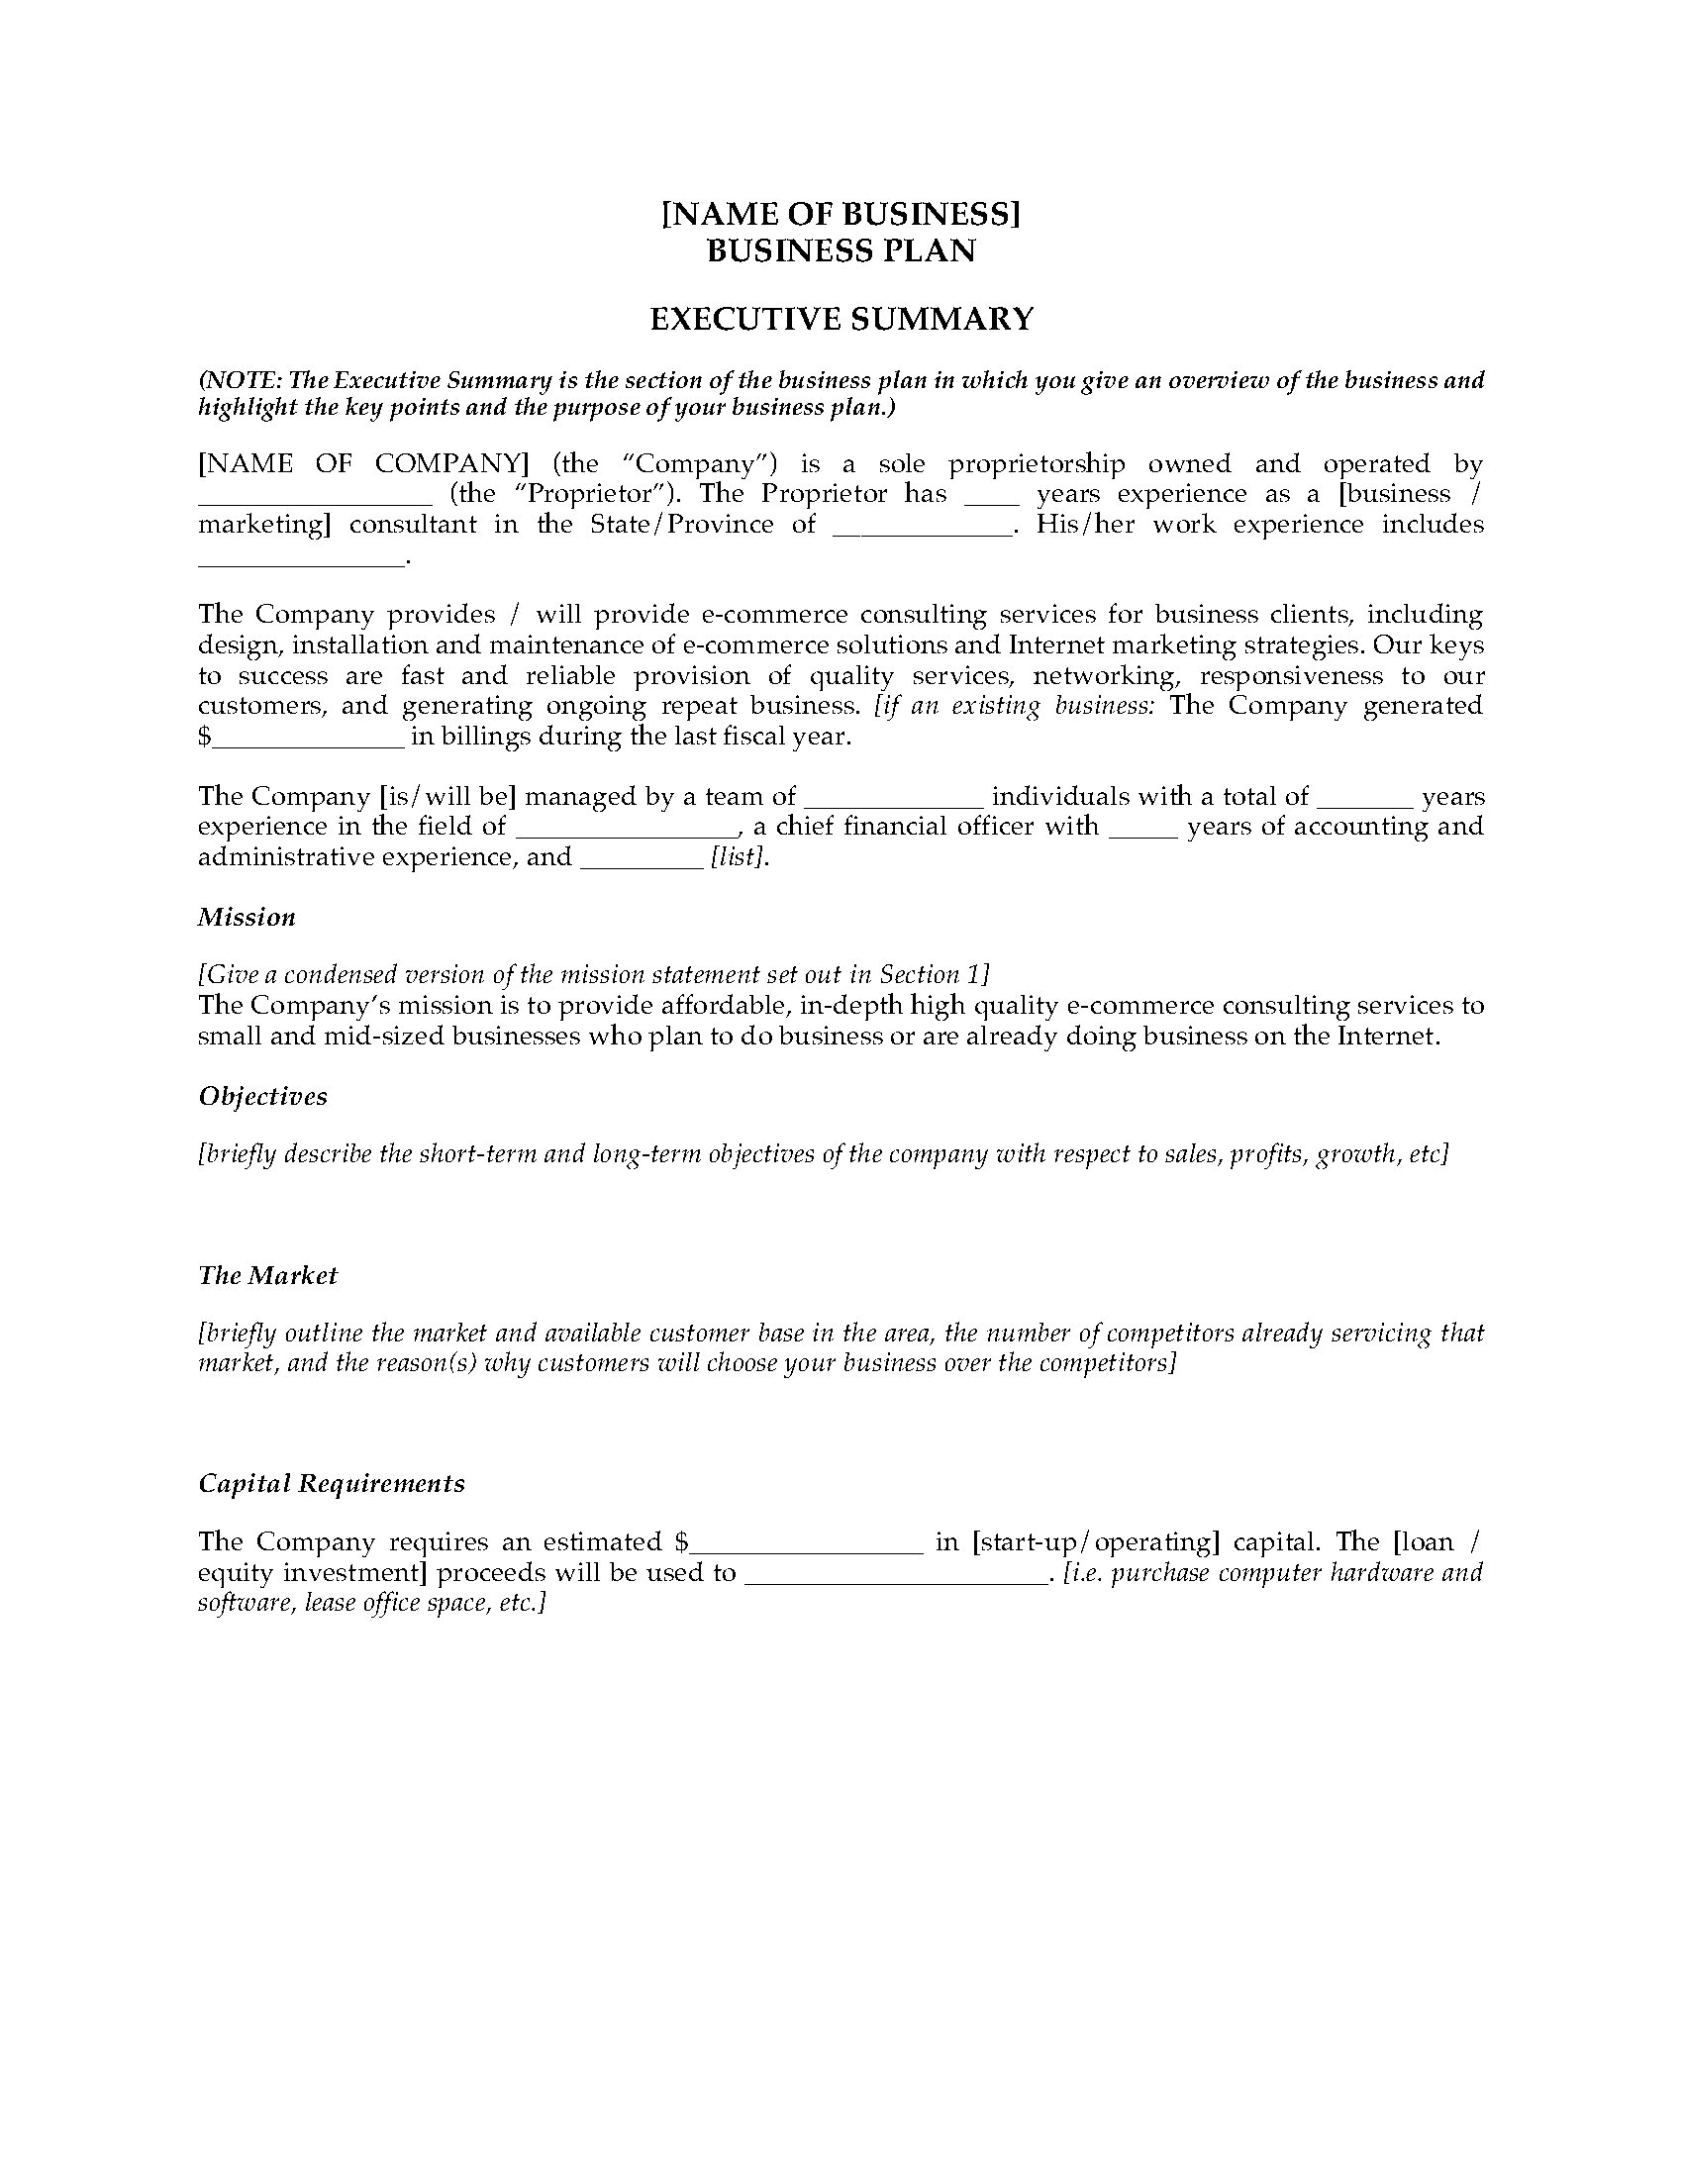 E Commerce Consultant Business Plan | Legal Forms And Business With Regard To Business Plan Template For Consulting Firm